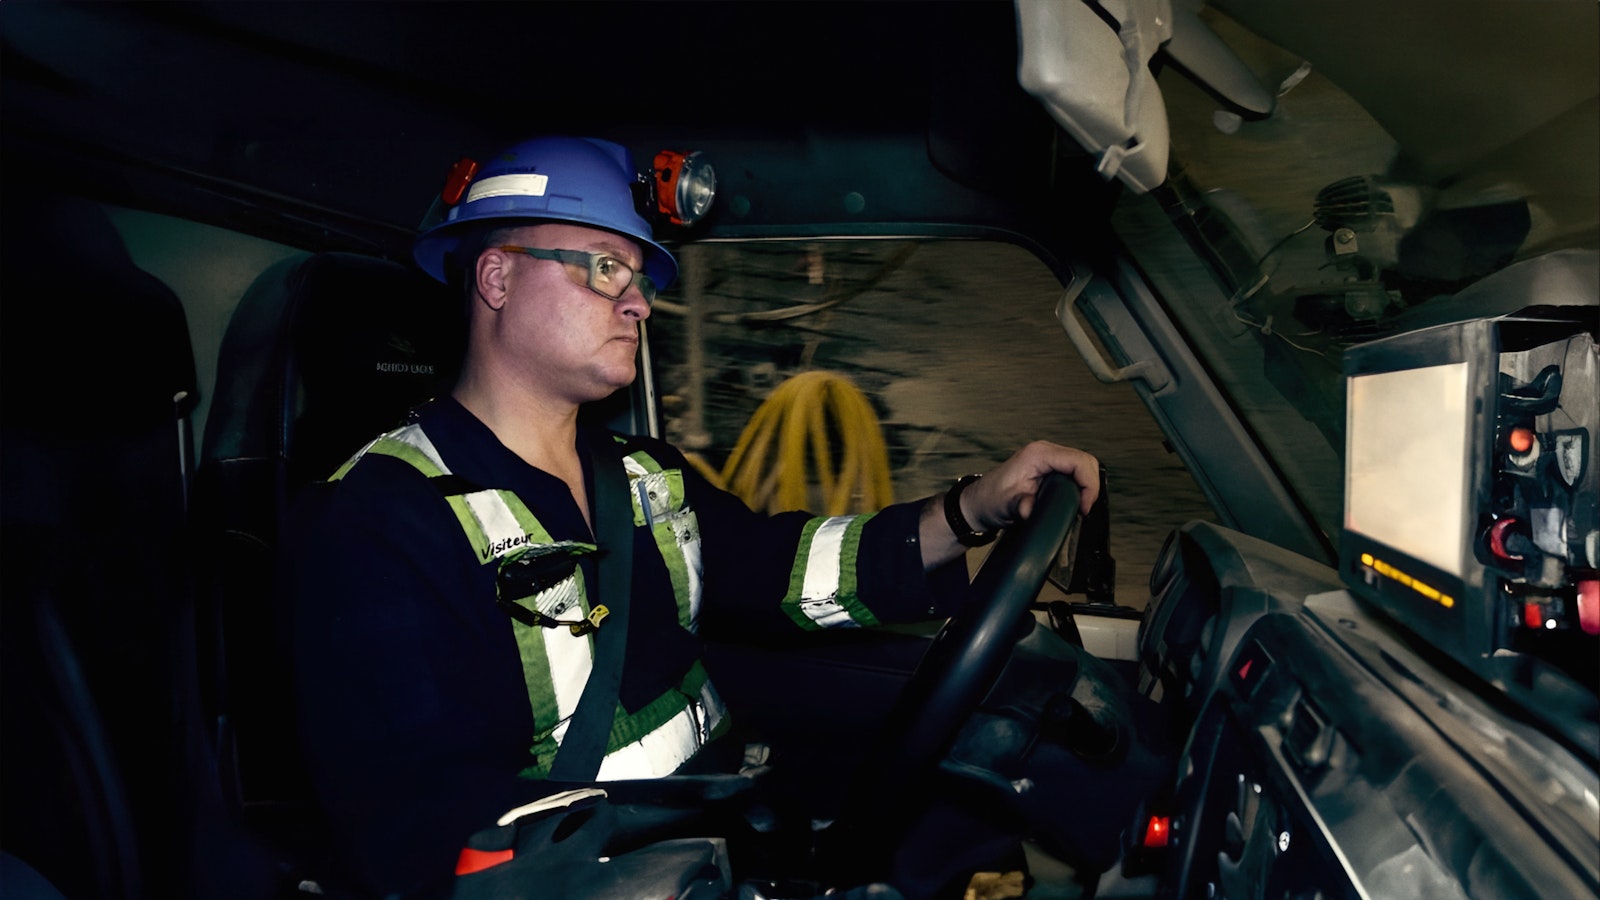 A miner sits driving a truck underground. In the cab he wears a blue safety hat with a light and fluorescent yellow stripes.